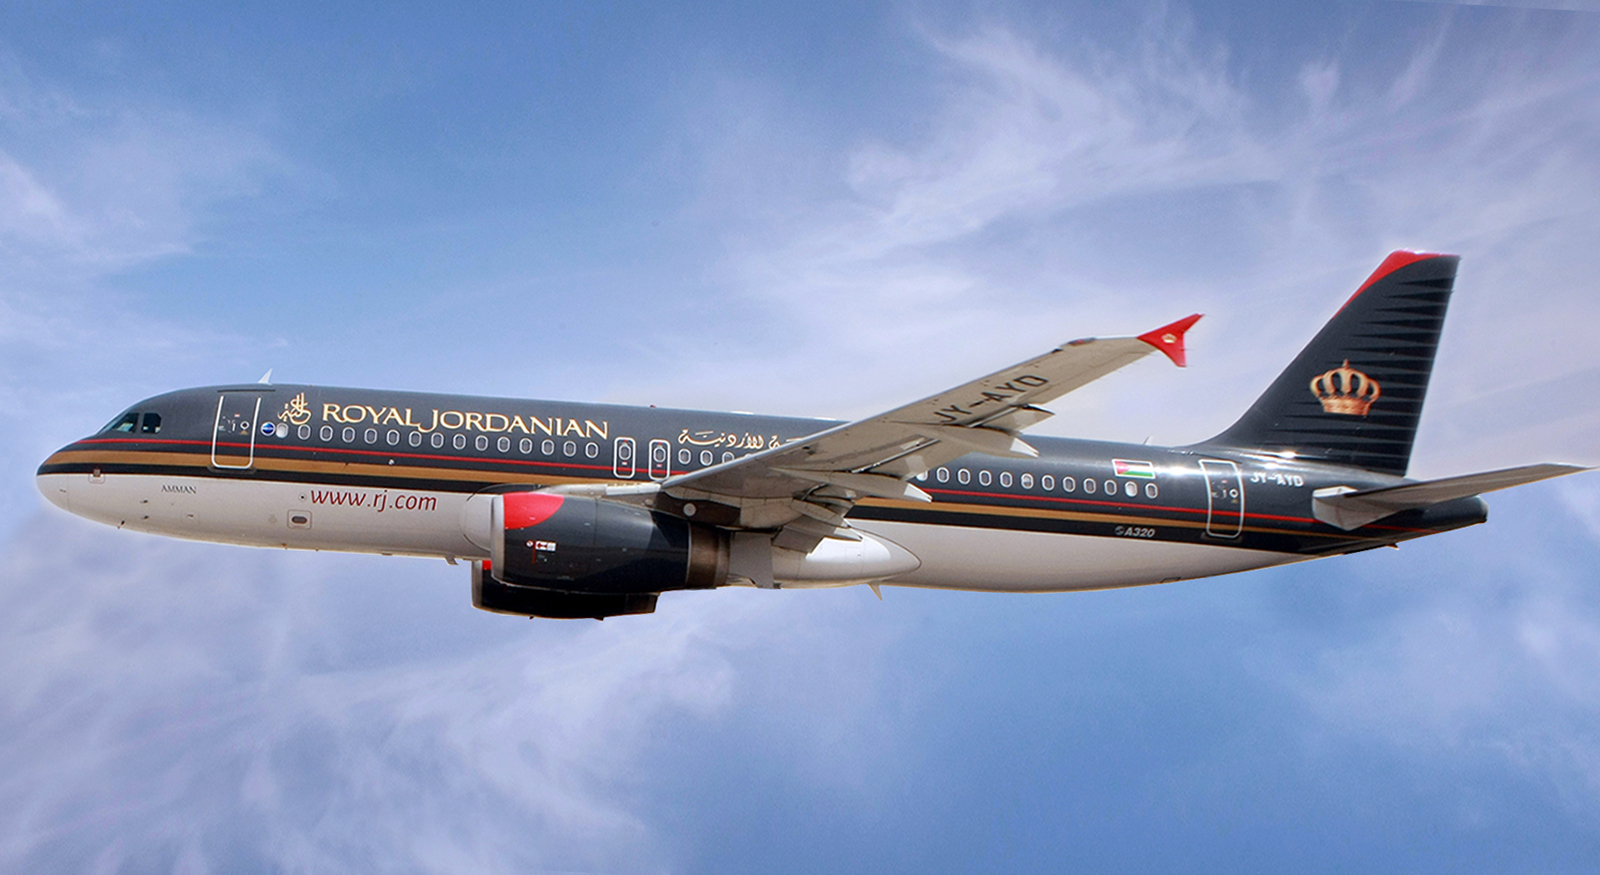 LHT signs extensive component support agreement with Royal Jordanian Airlines